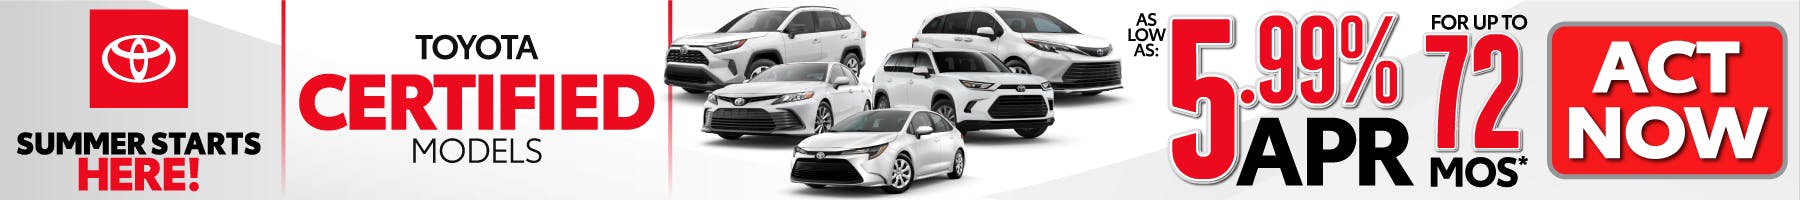 Toyota Certified Models – As low as 5.99% APR for up to 72 months* – Act Now | Miller Toyota